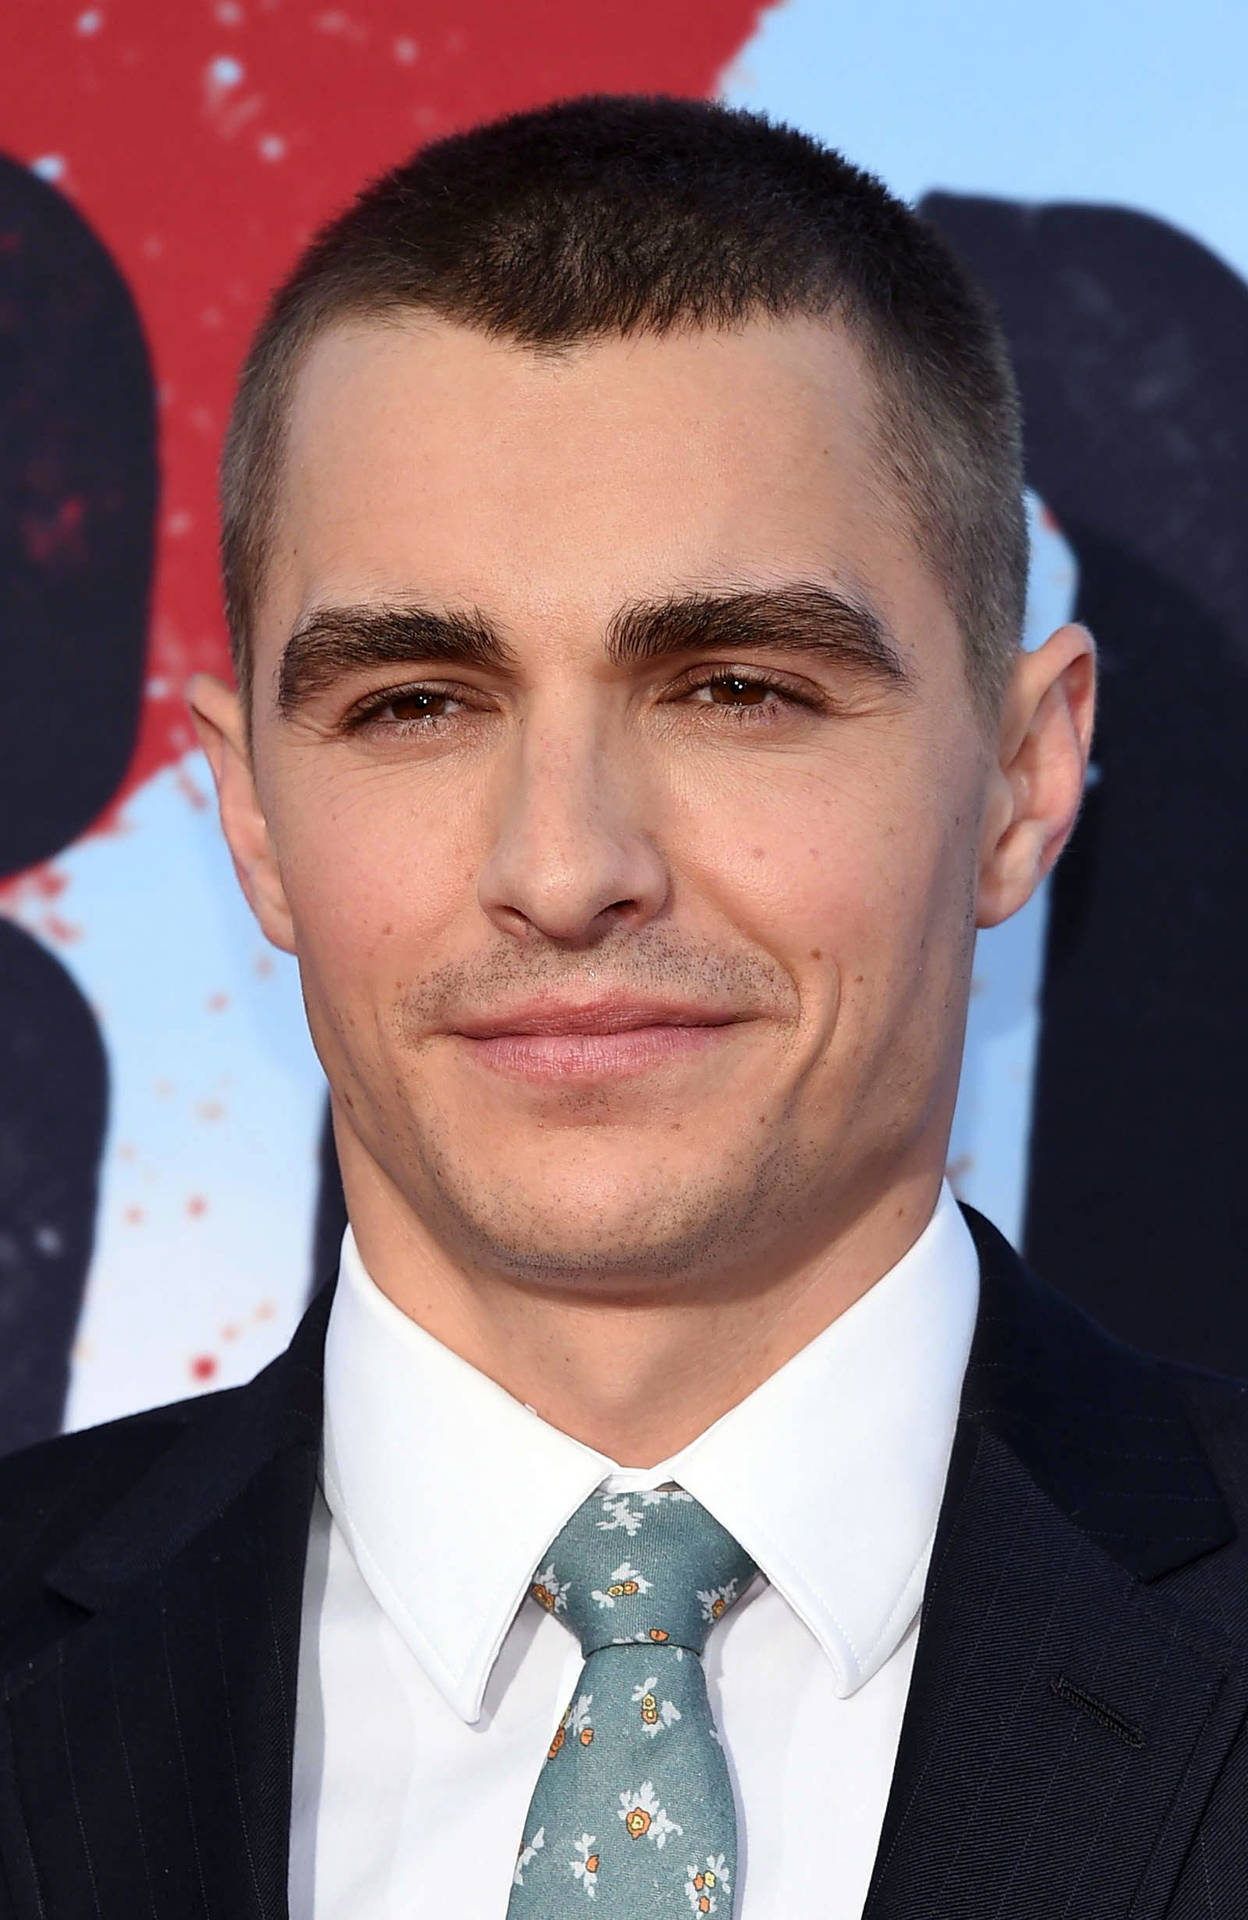 Davefranco Butch Cut Men Hair Style Would Be Translated To 